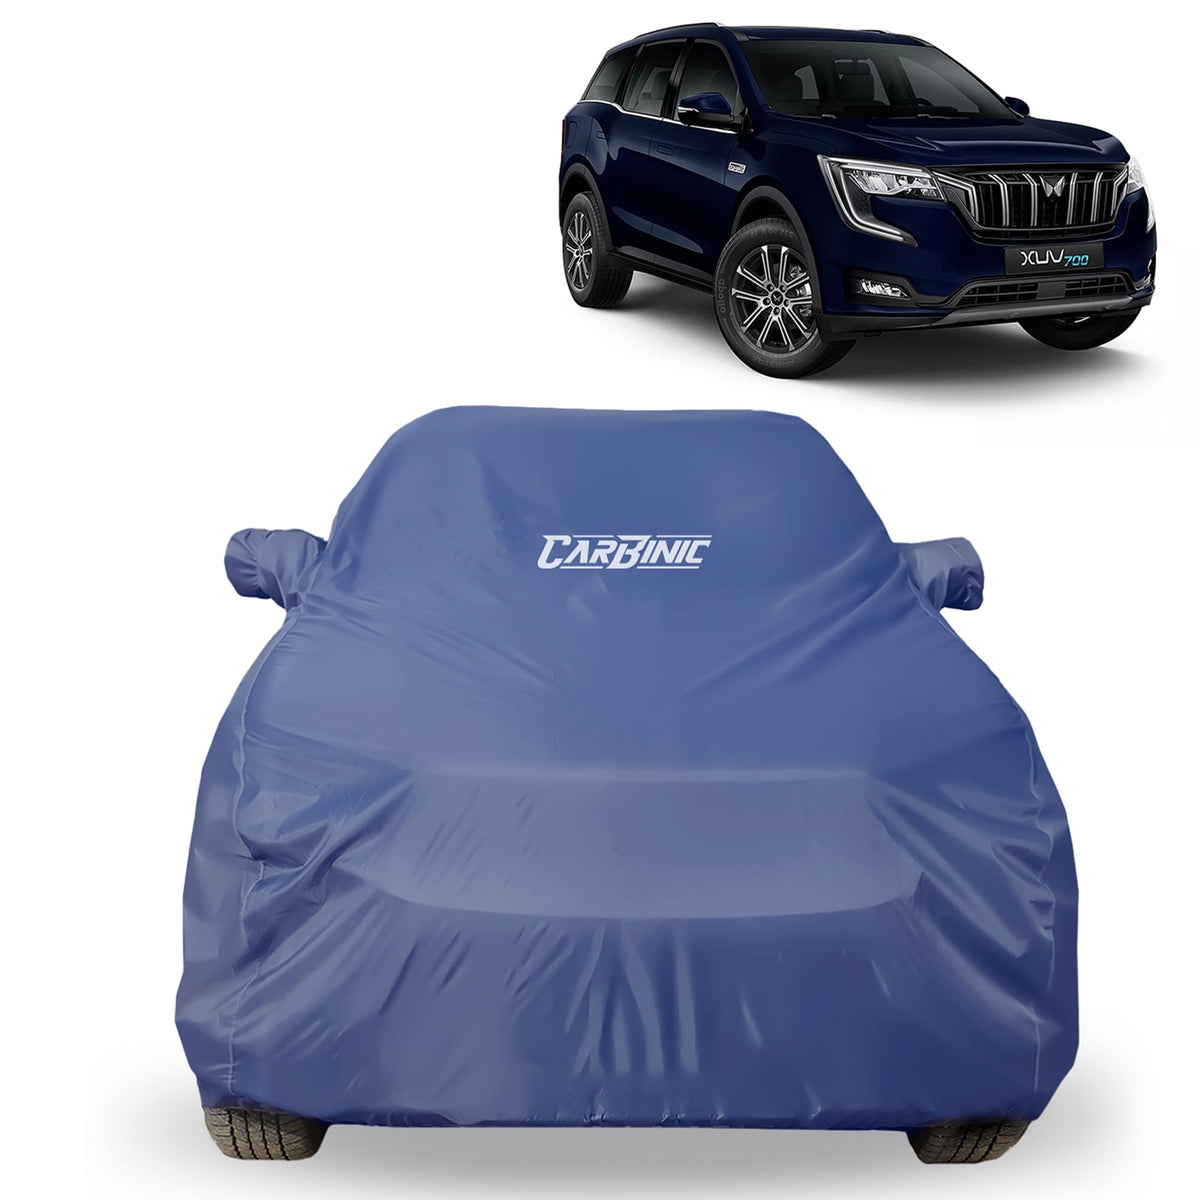 CARBINIC Car Body Cover for Citroen C3 2022 | Water Resistant, UV Protection Car Cover | Scratchproof Body Shield | All-Weather Cover | Mirror Pocket & Antenna | Car Accessories Dusk Blue